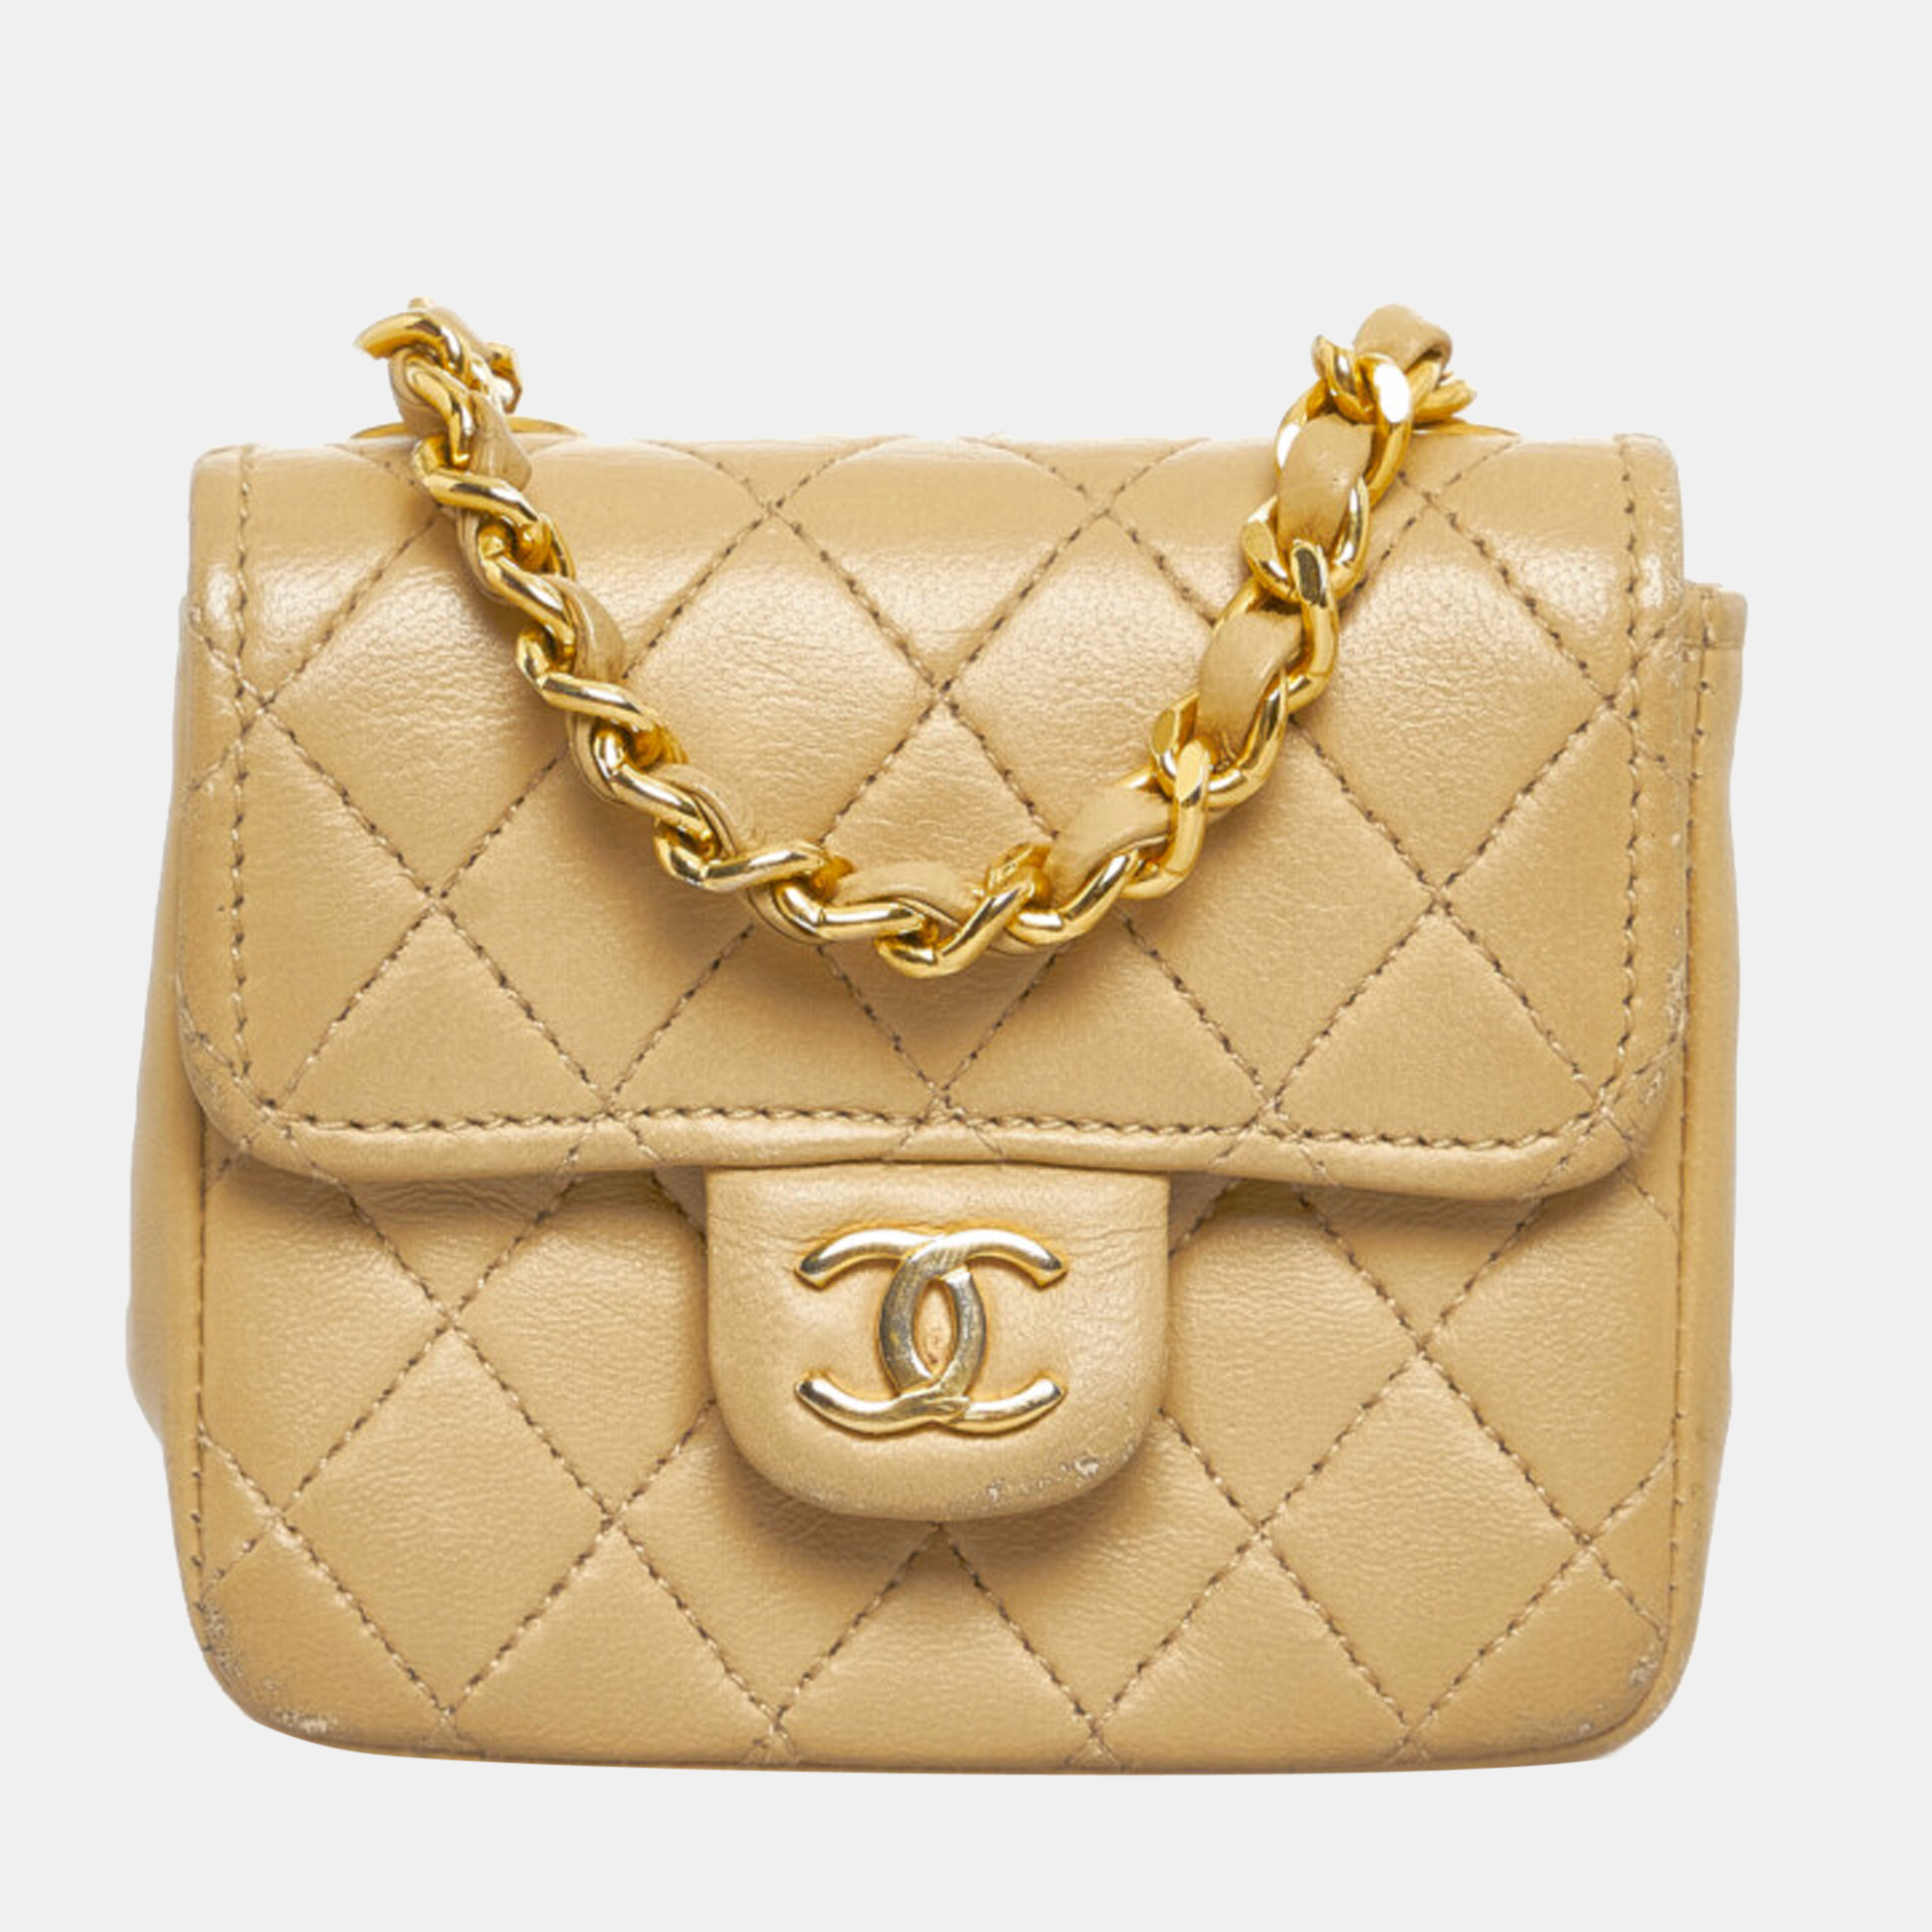 Pre-owned Chanel Beige Leather Micro Classic Flap Belt Bag